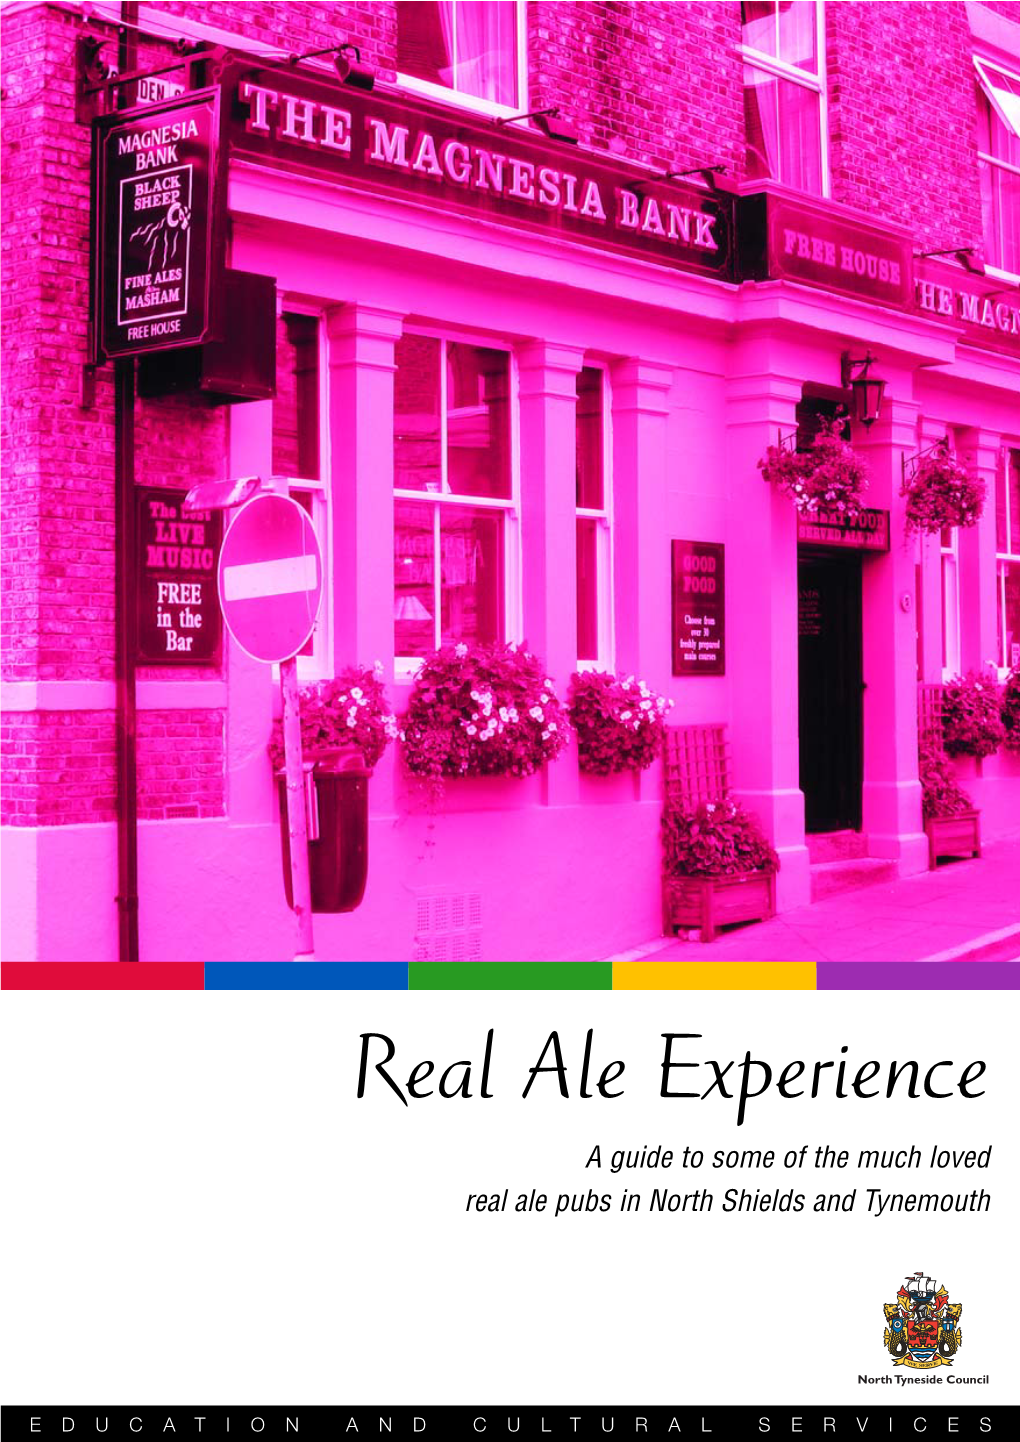 Real Ale Experience a Guide to Some of the Much Loved Real Ale Pubs in North Shields and Tynemouth